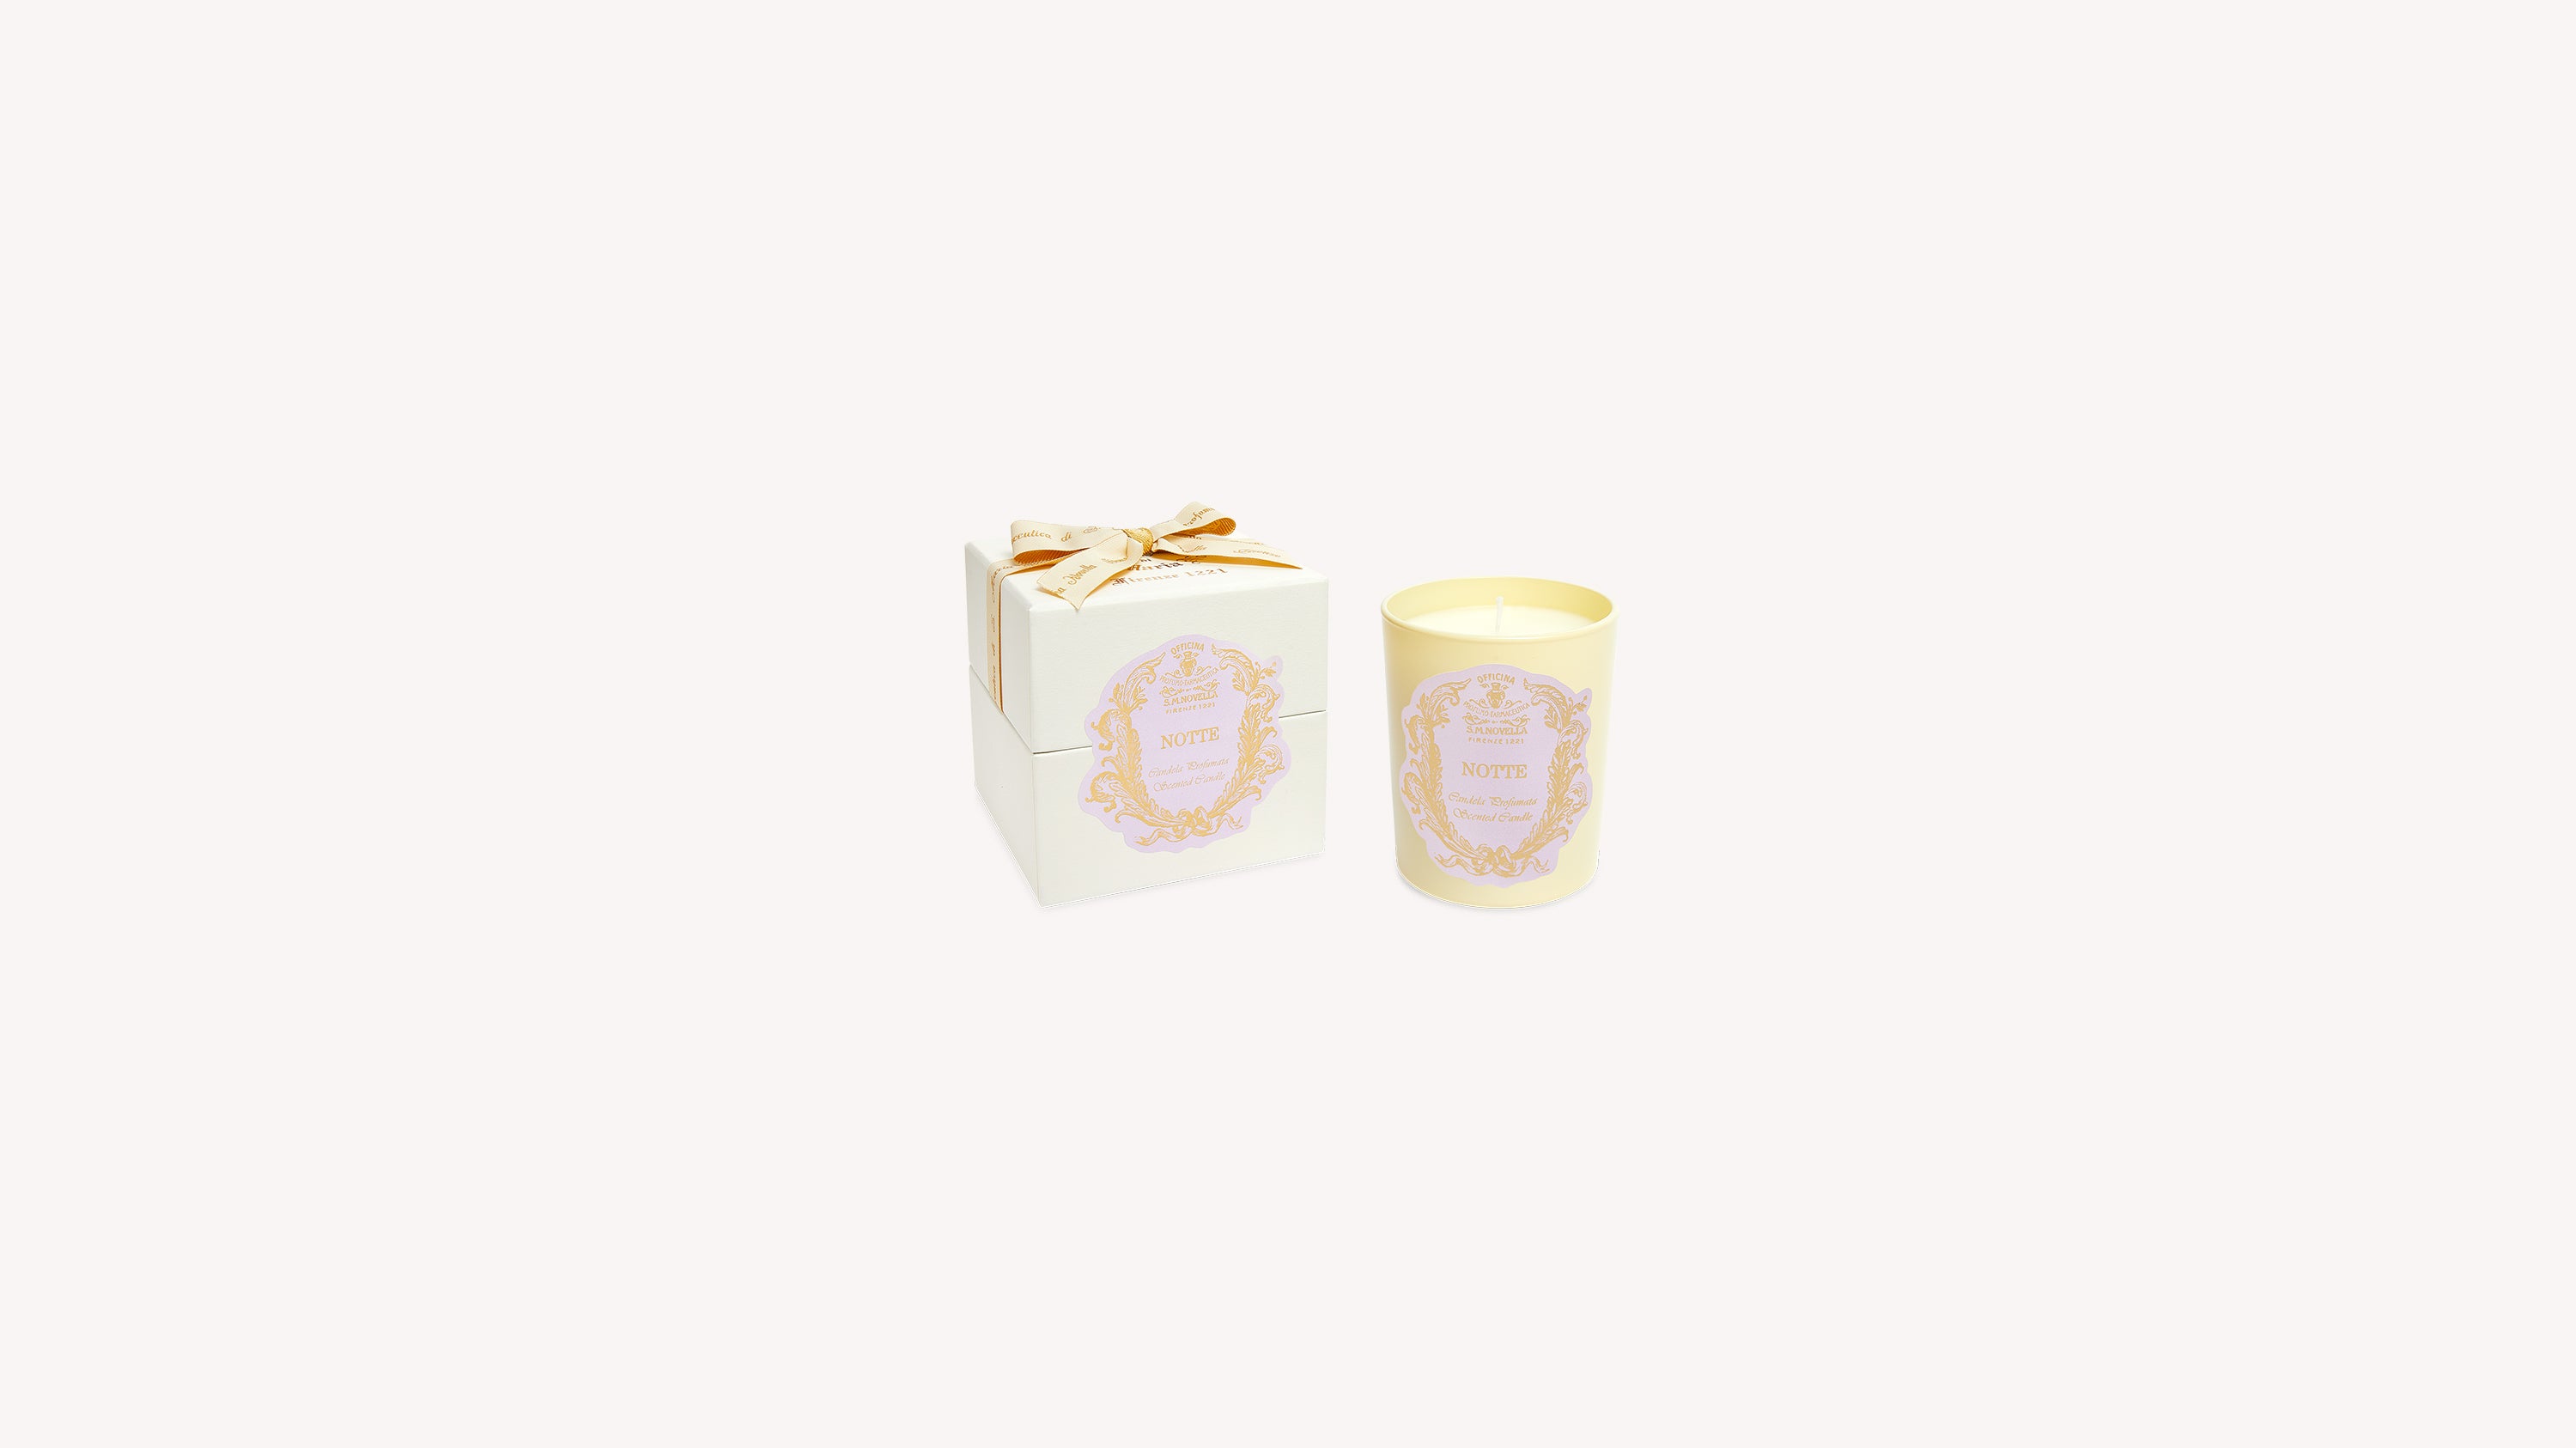 Notte Scented Candle